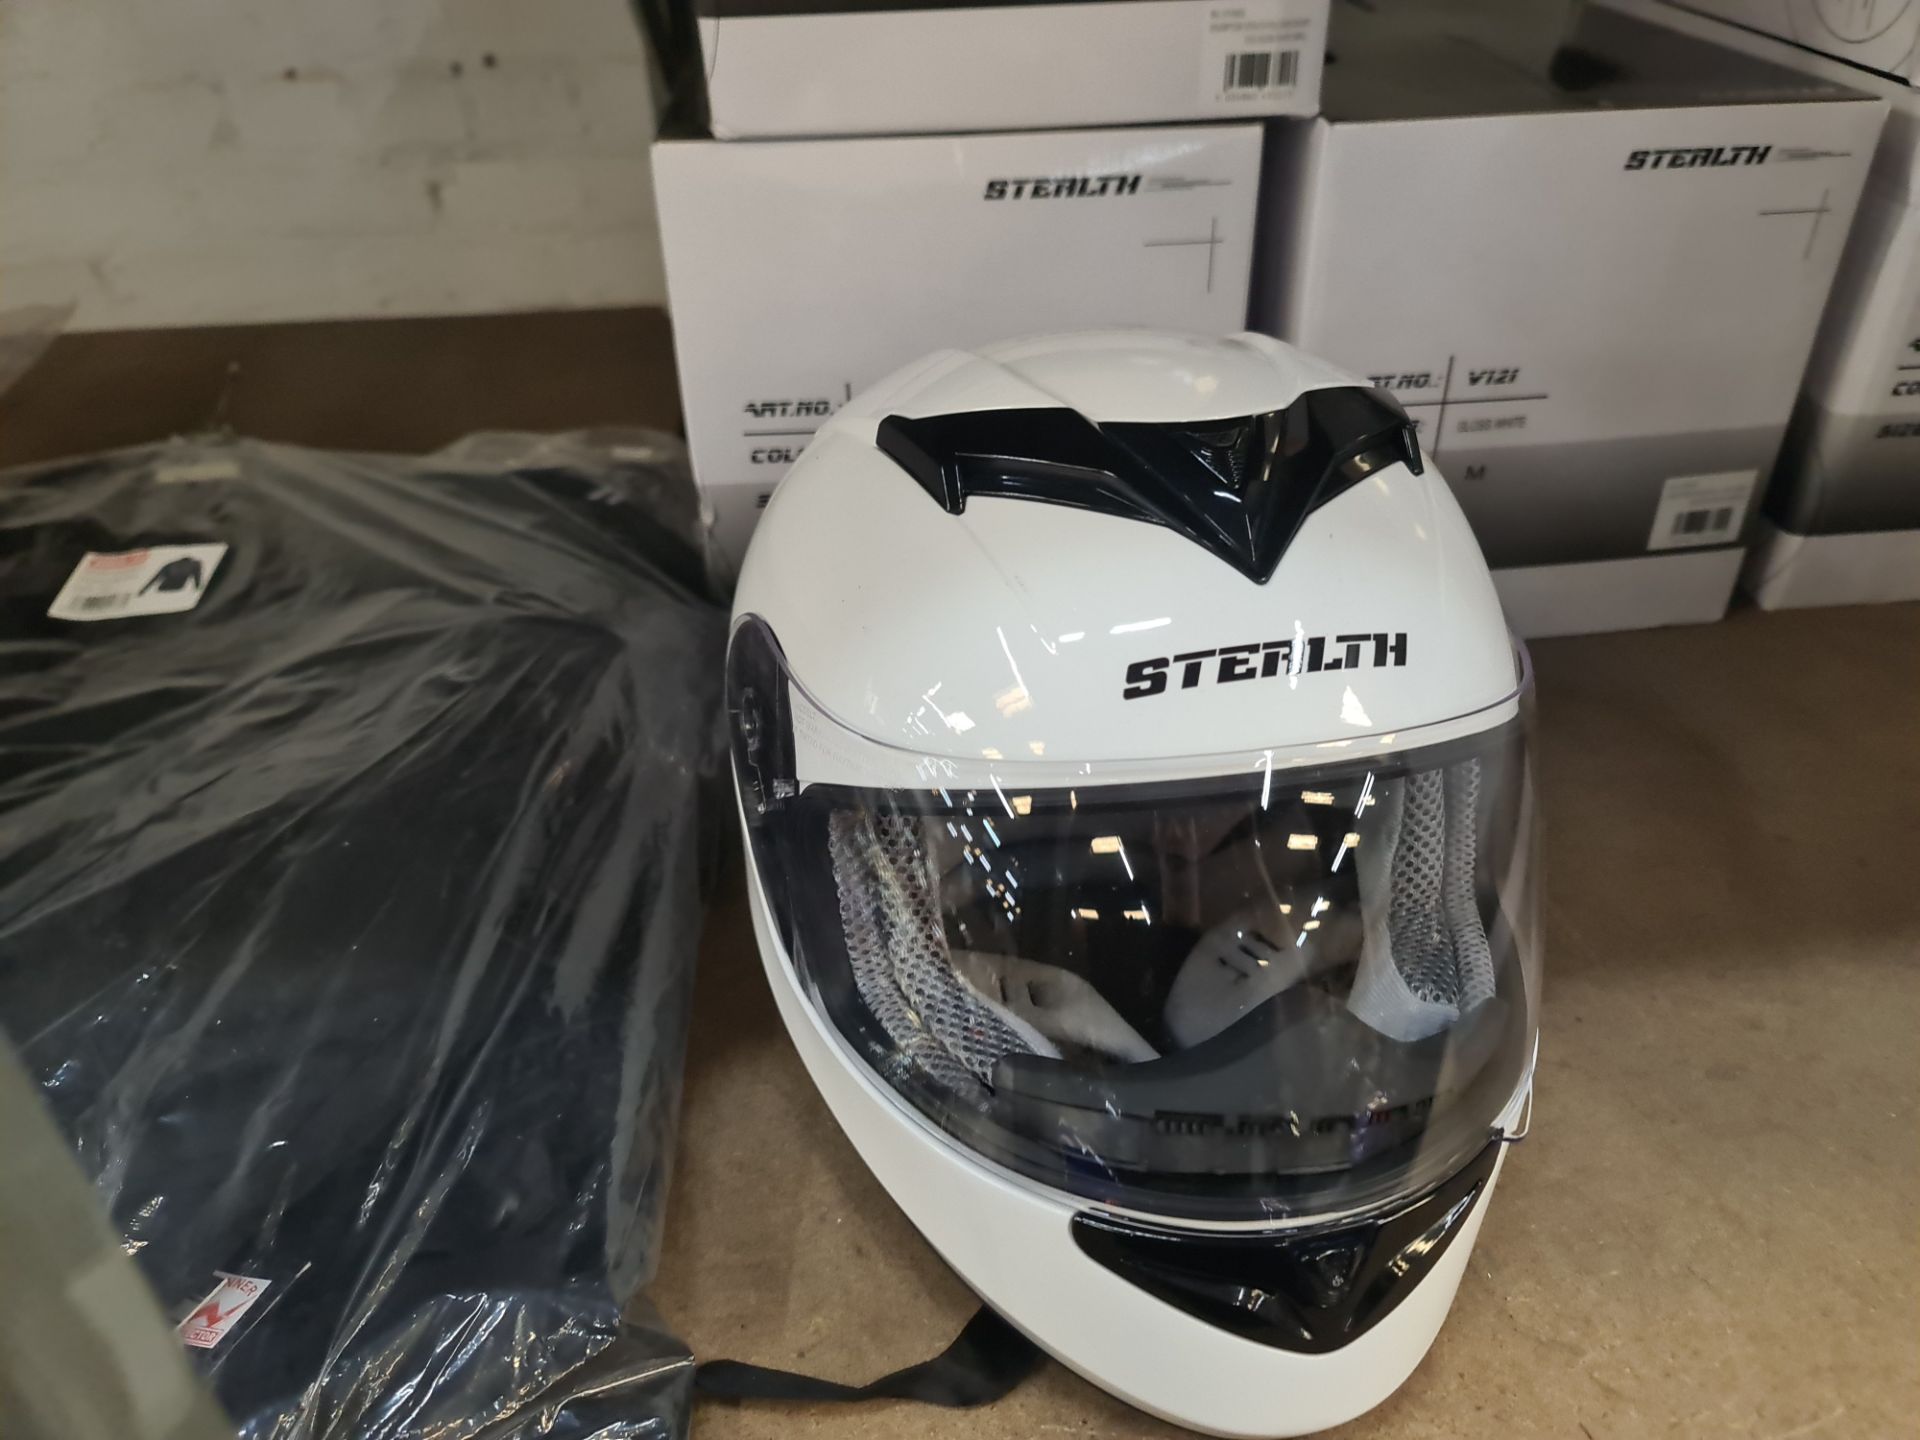 4 off Stealth V121 gloss white helmets - 1 each of S, M, L & XL - Image 3 of 8